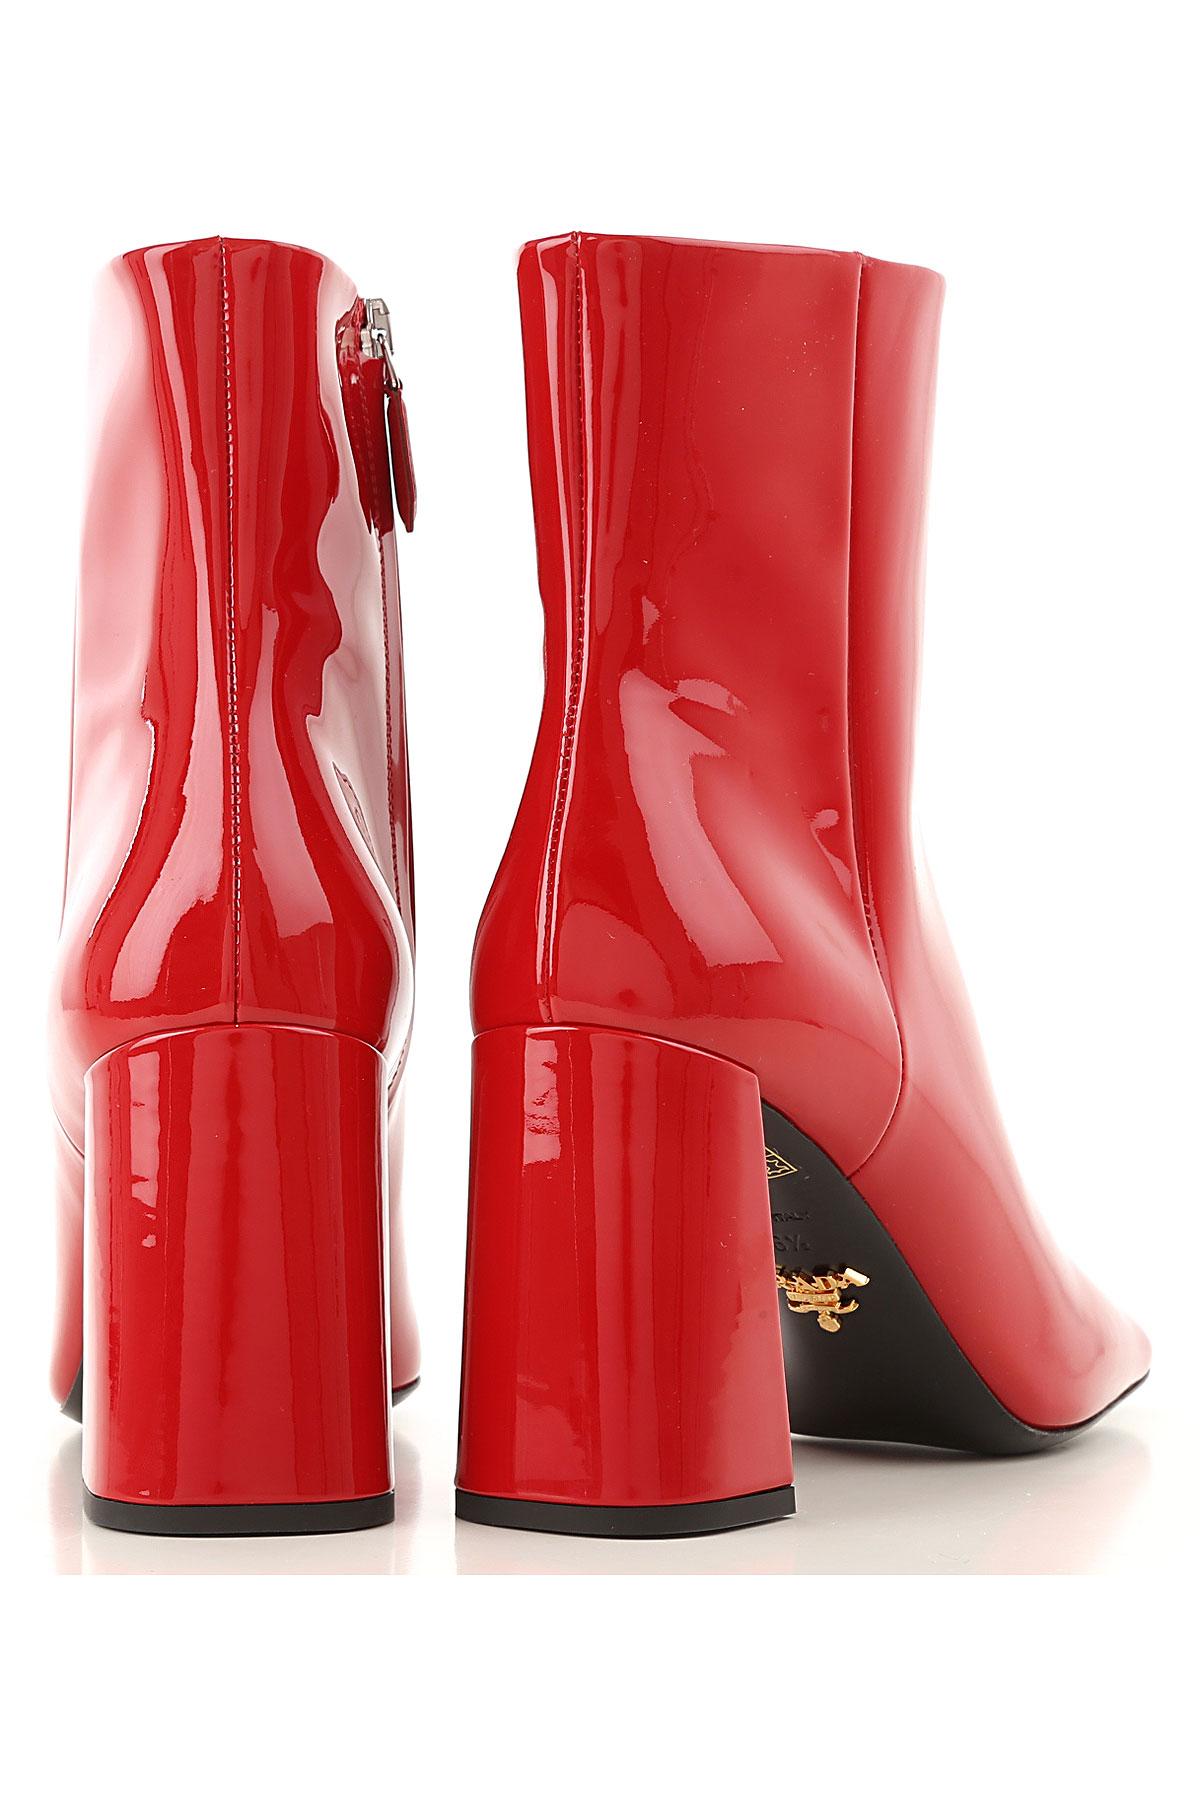 Prada Block Heel Patent Leather Bootie in Red - Save 8% - Lyst